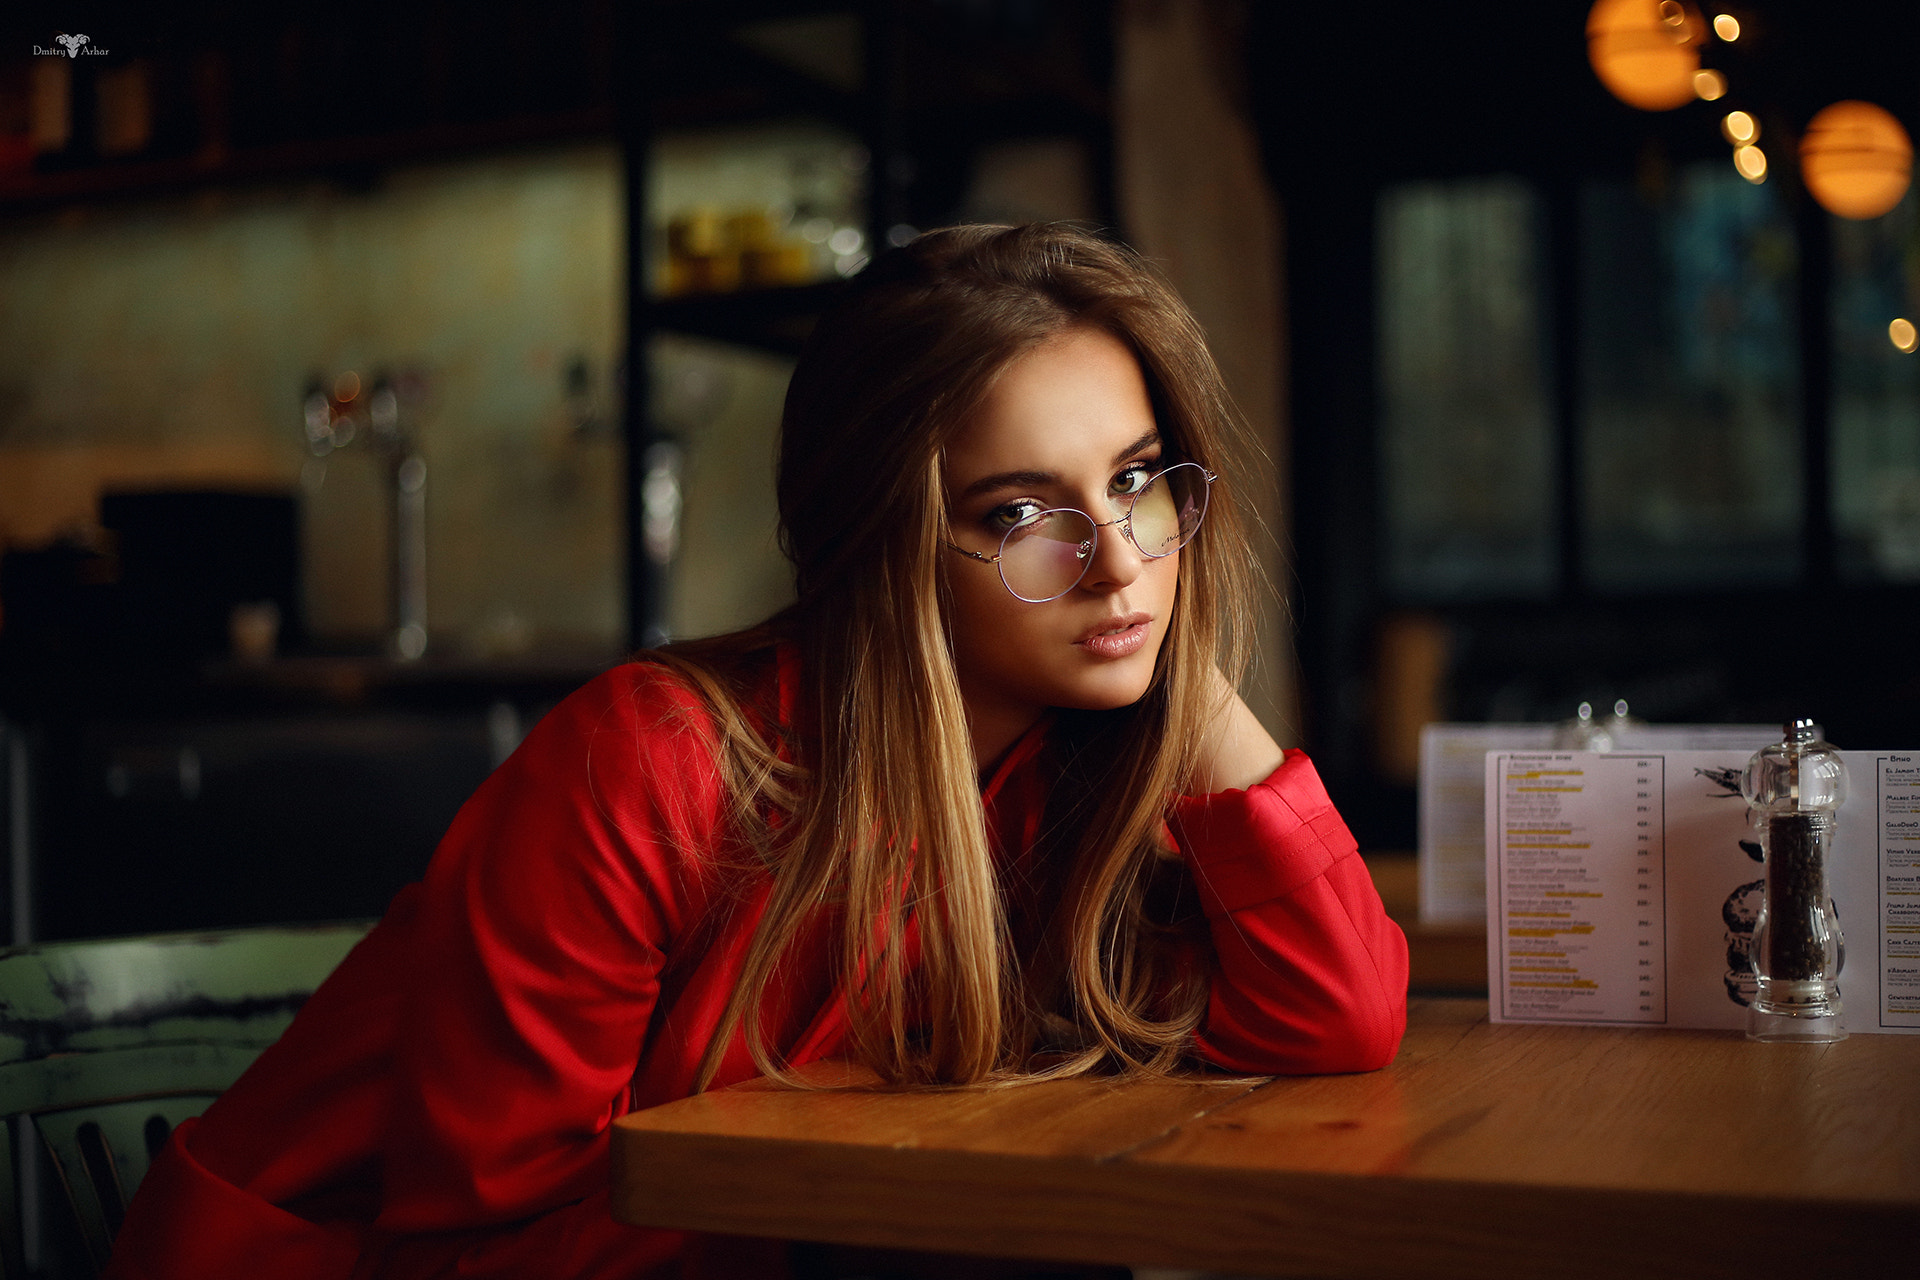 Women Dmitry Arhar Blonde Sitting Chair Table Women With Glasses Pink Lipstick Red Clothing Cafes Ca 1920x1280